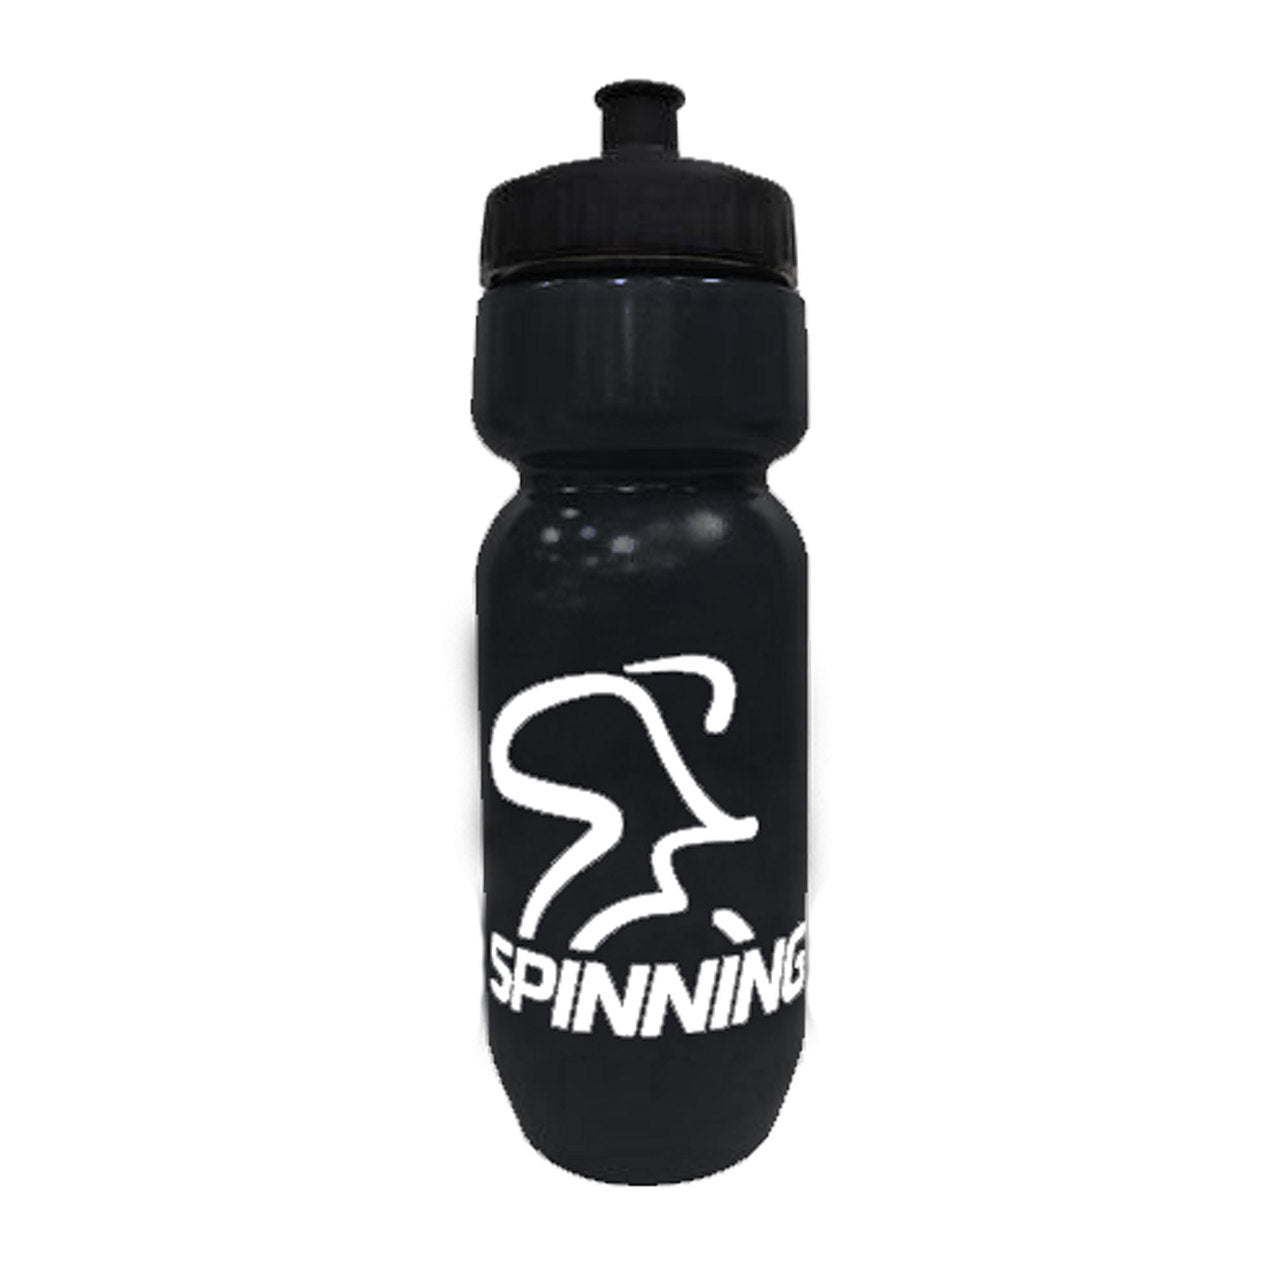 Spinning® Water Bottle Black Indoor Cyclery 